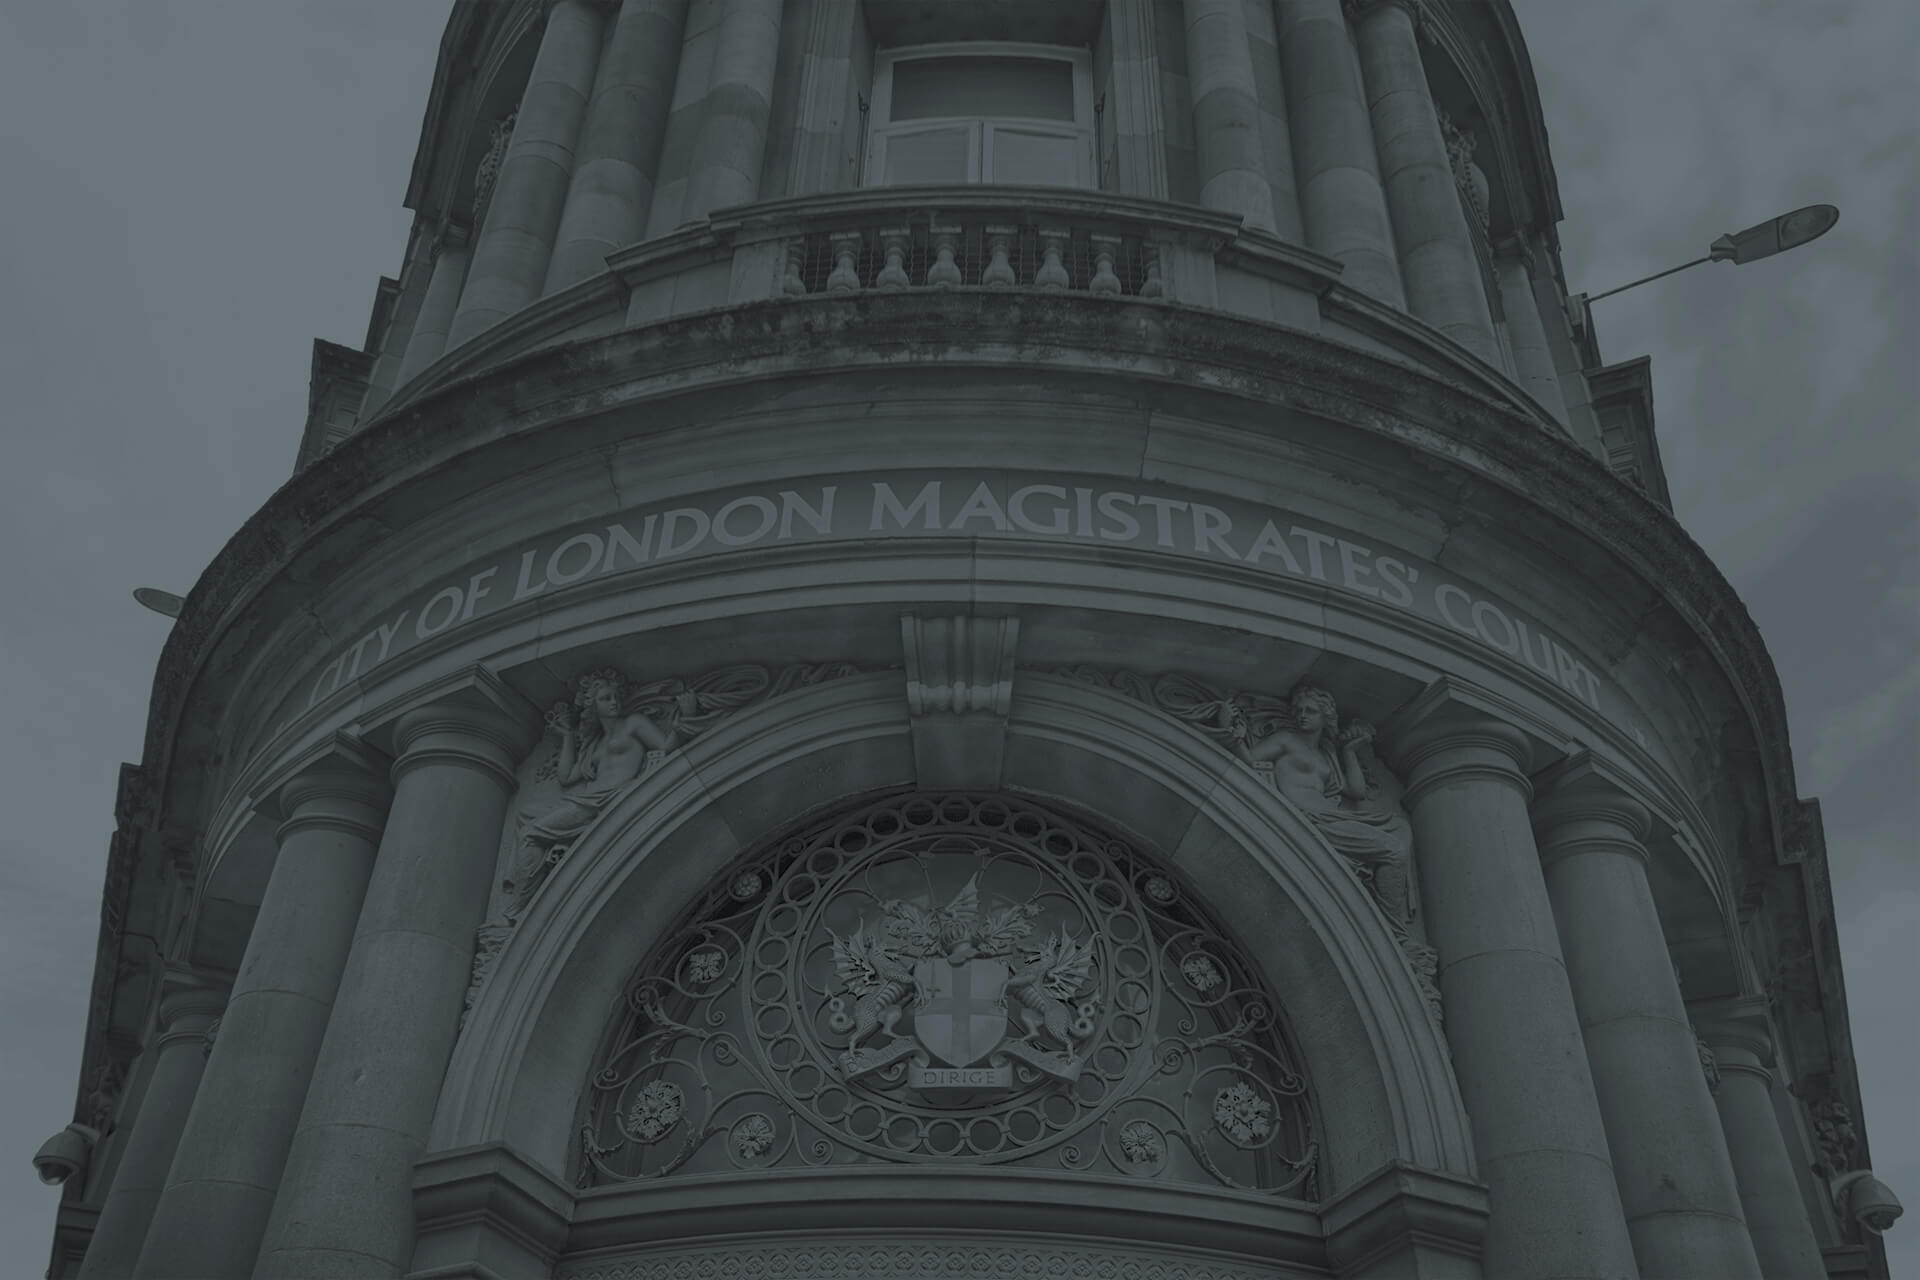 city of london magistrates